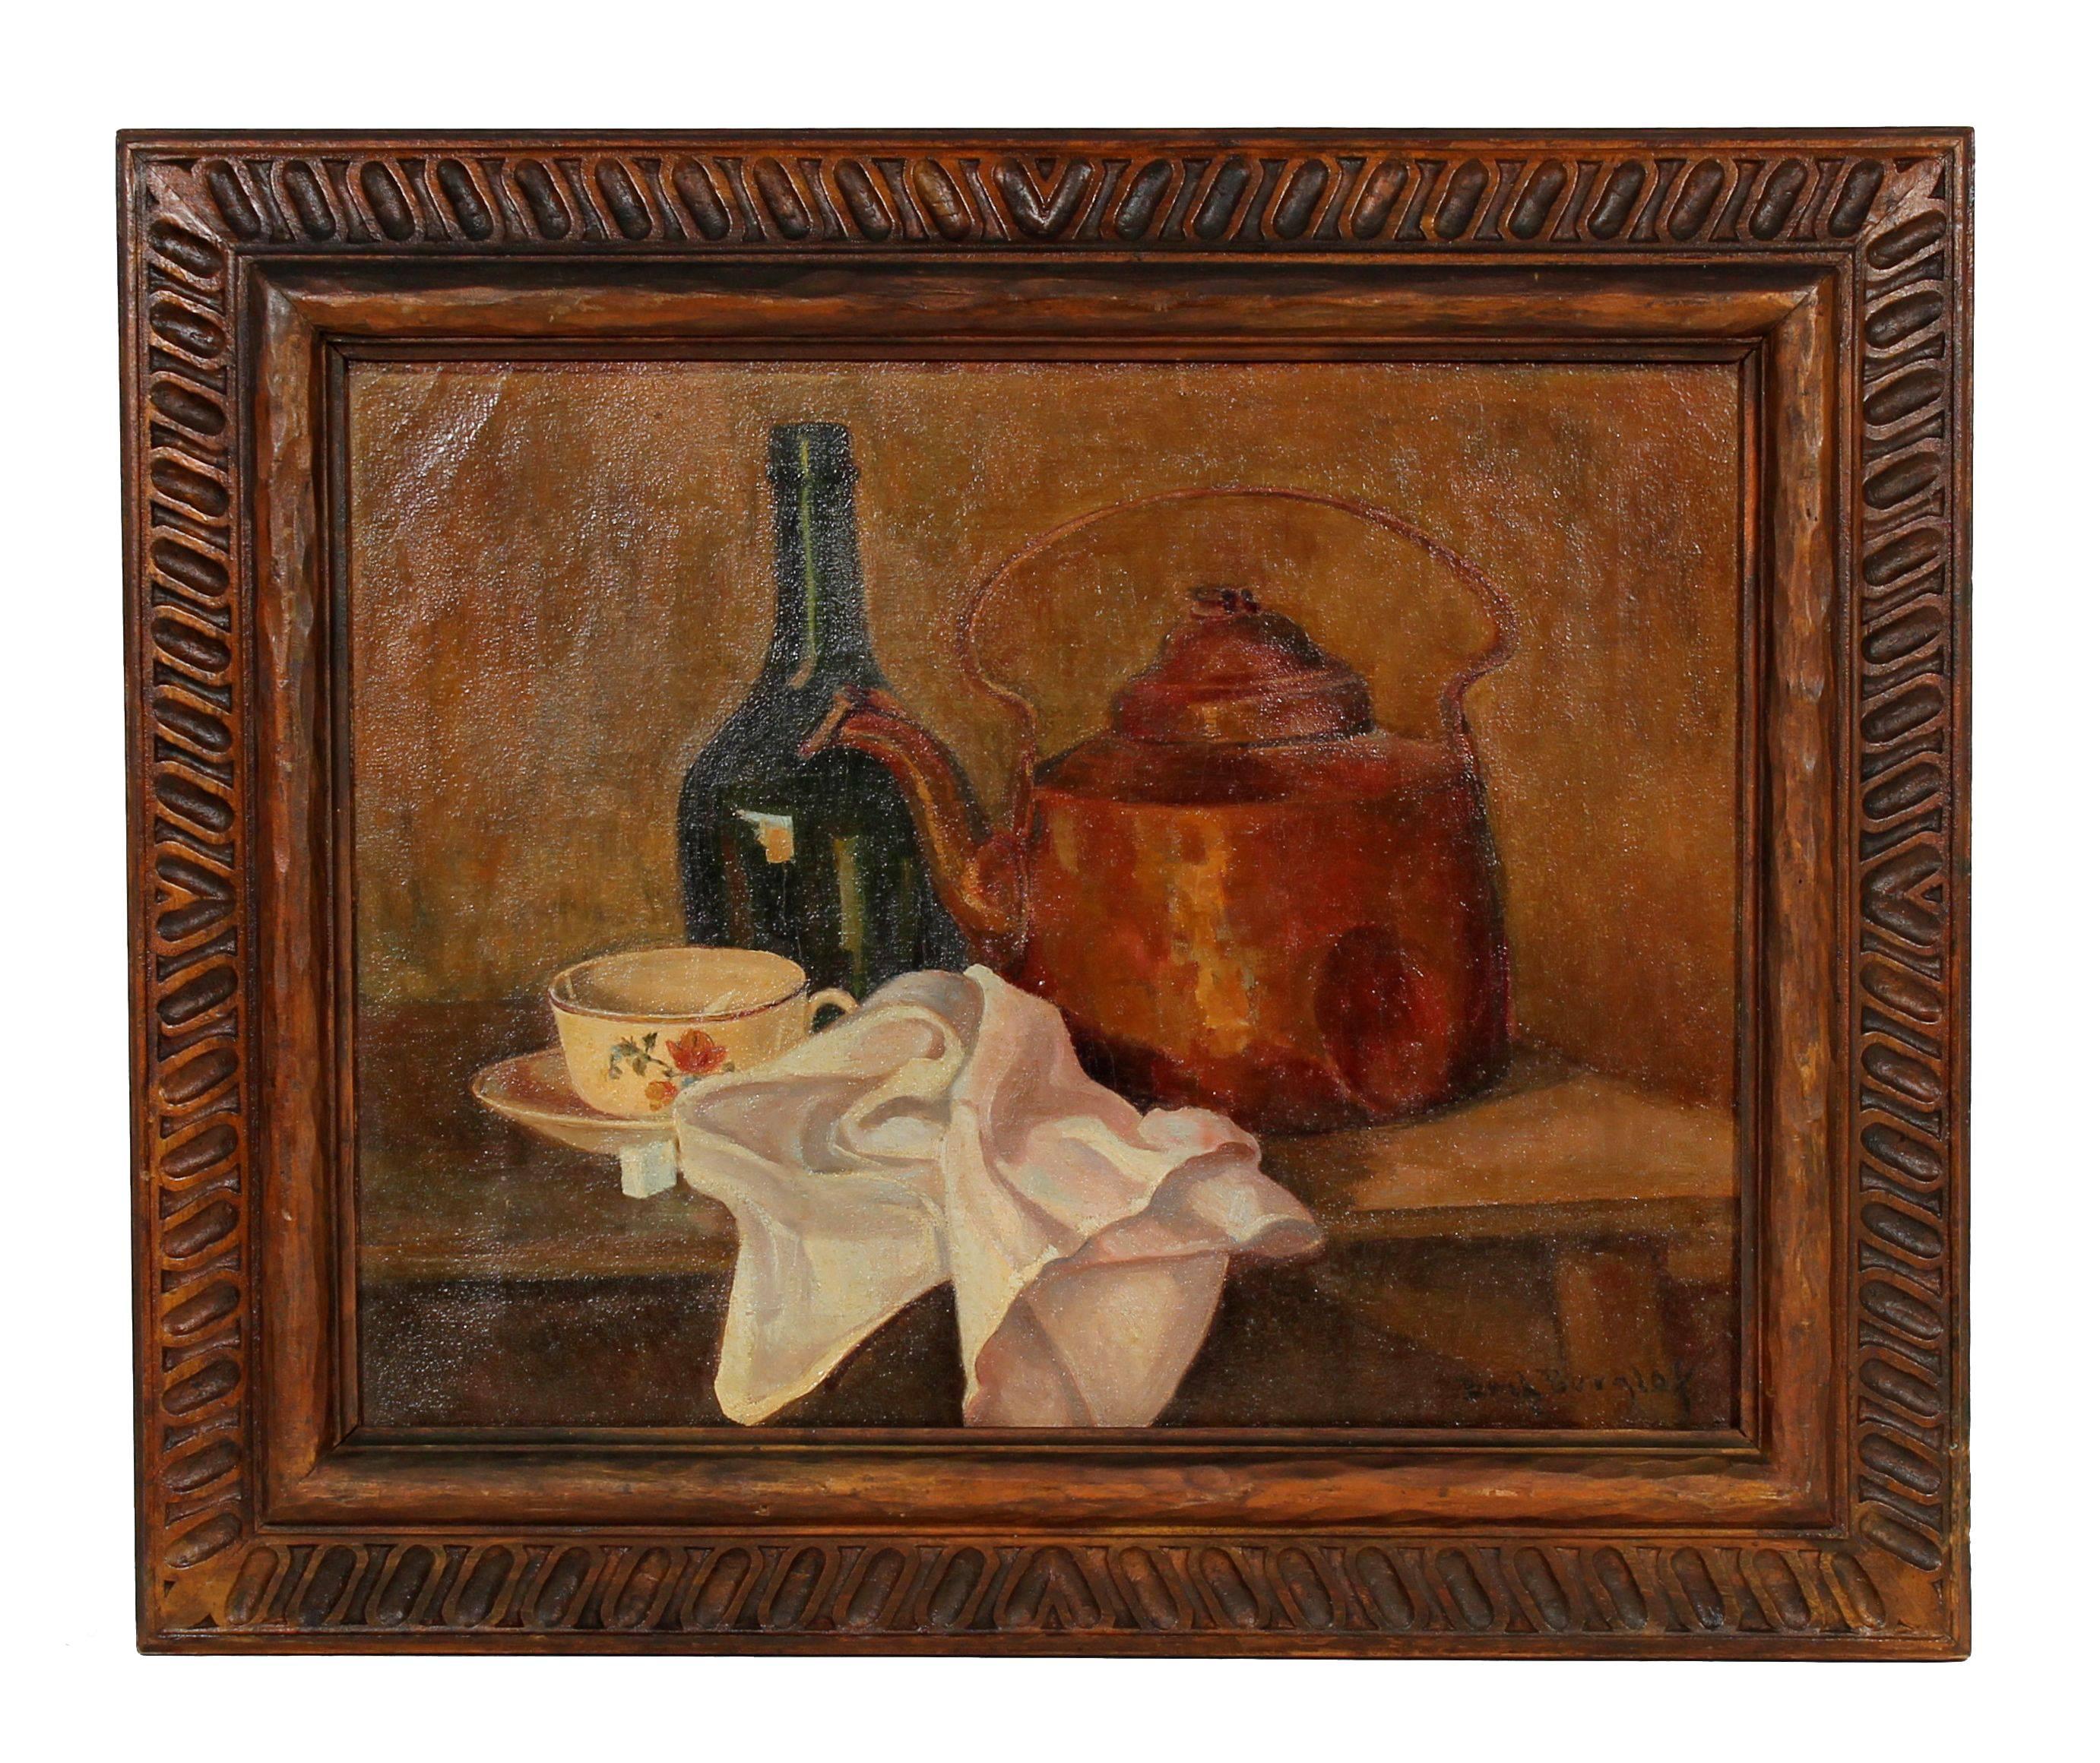 Unknown Still-Life Painting - Kettle and Bottle Still Life in Oil, Early 20th Century